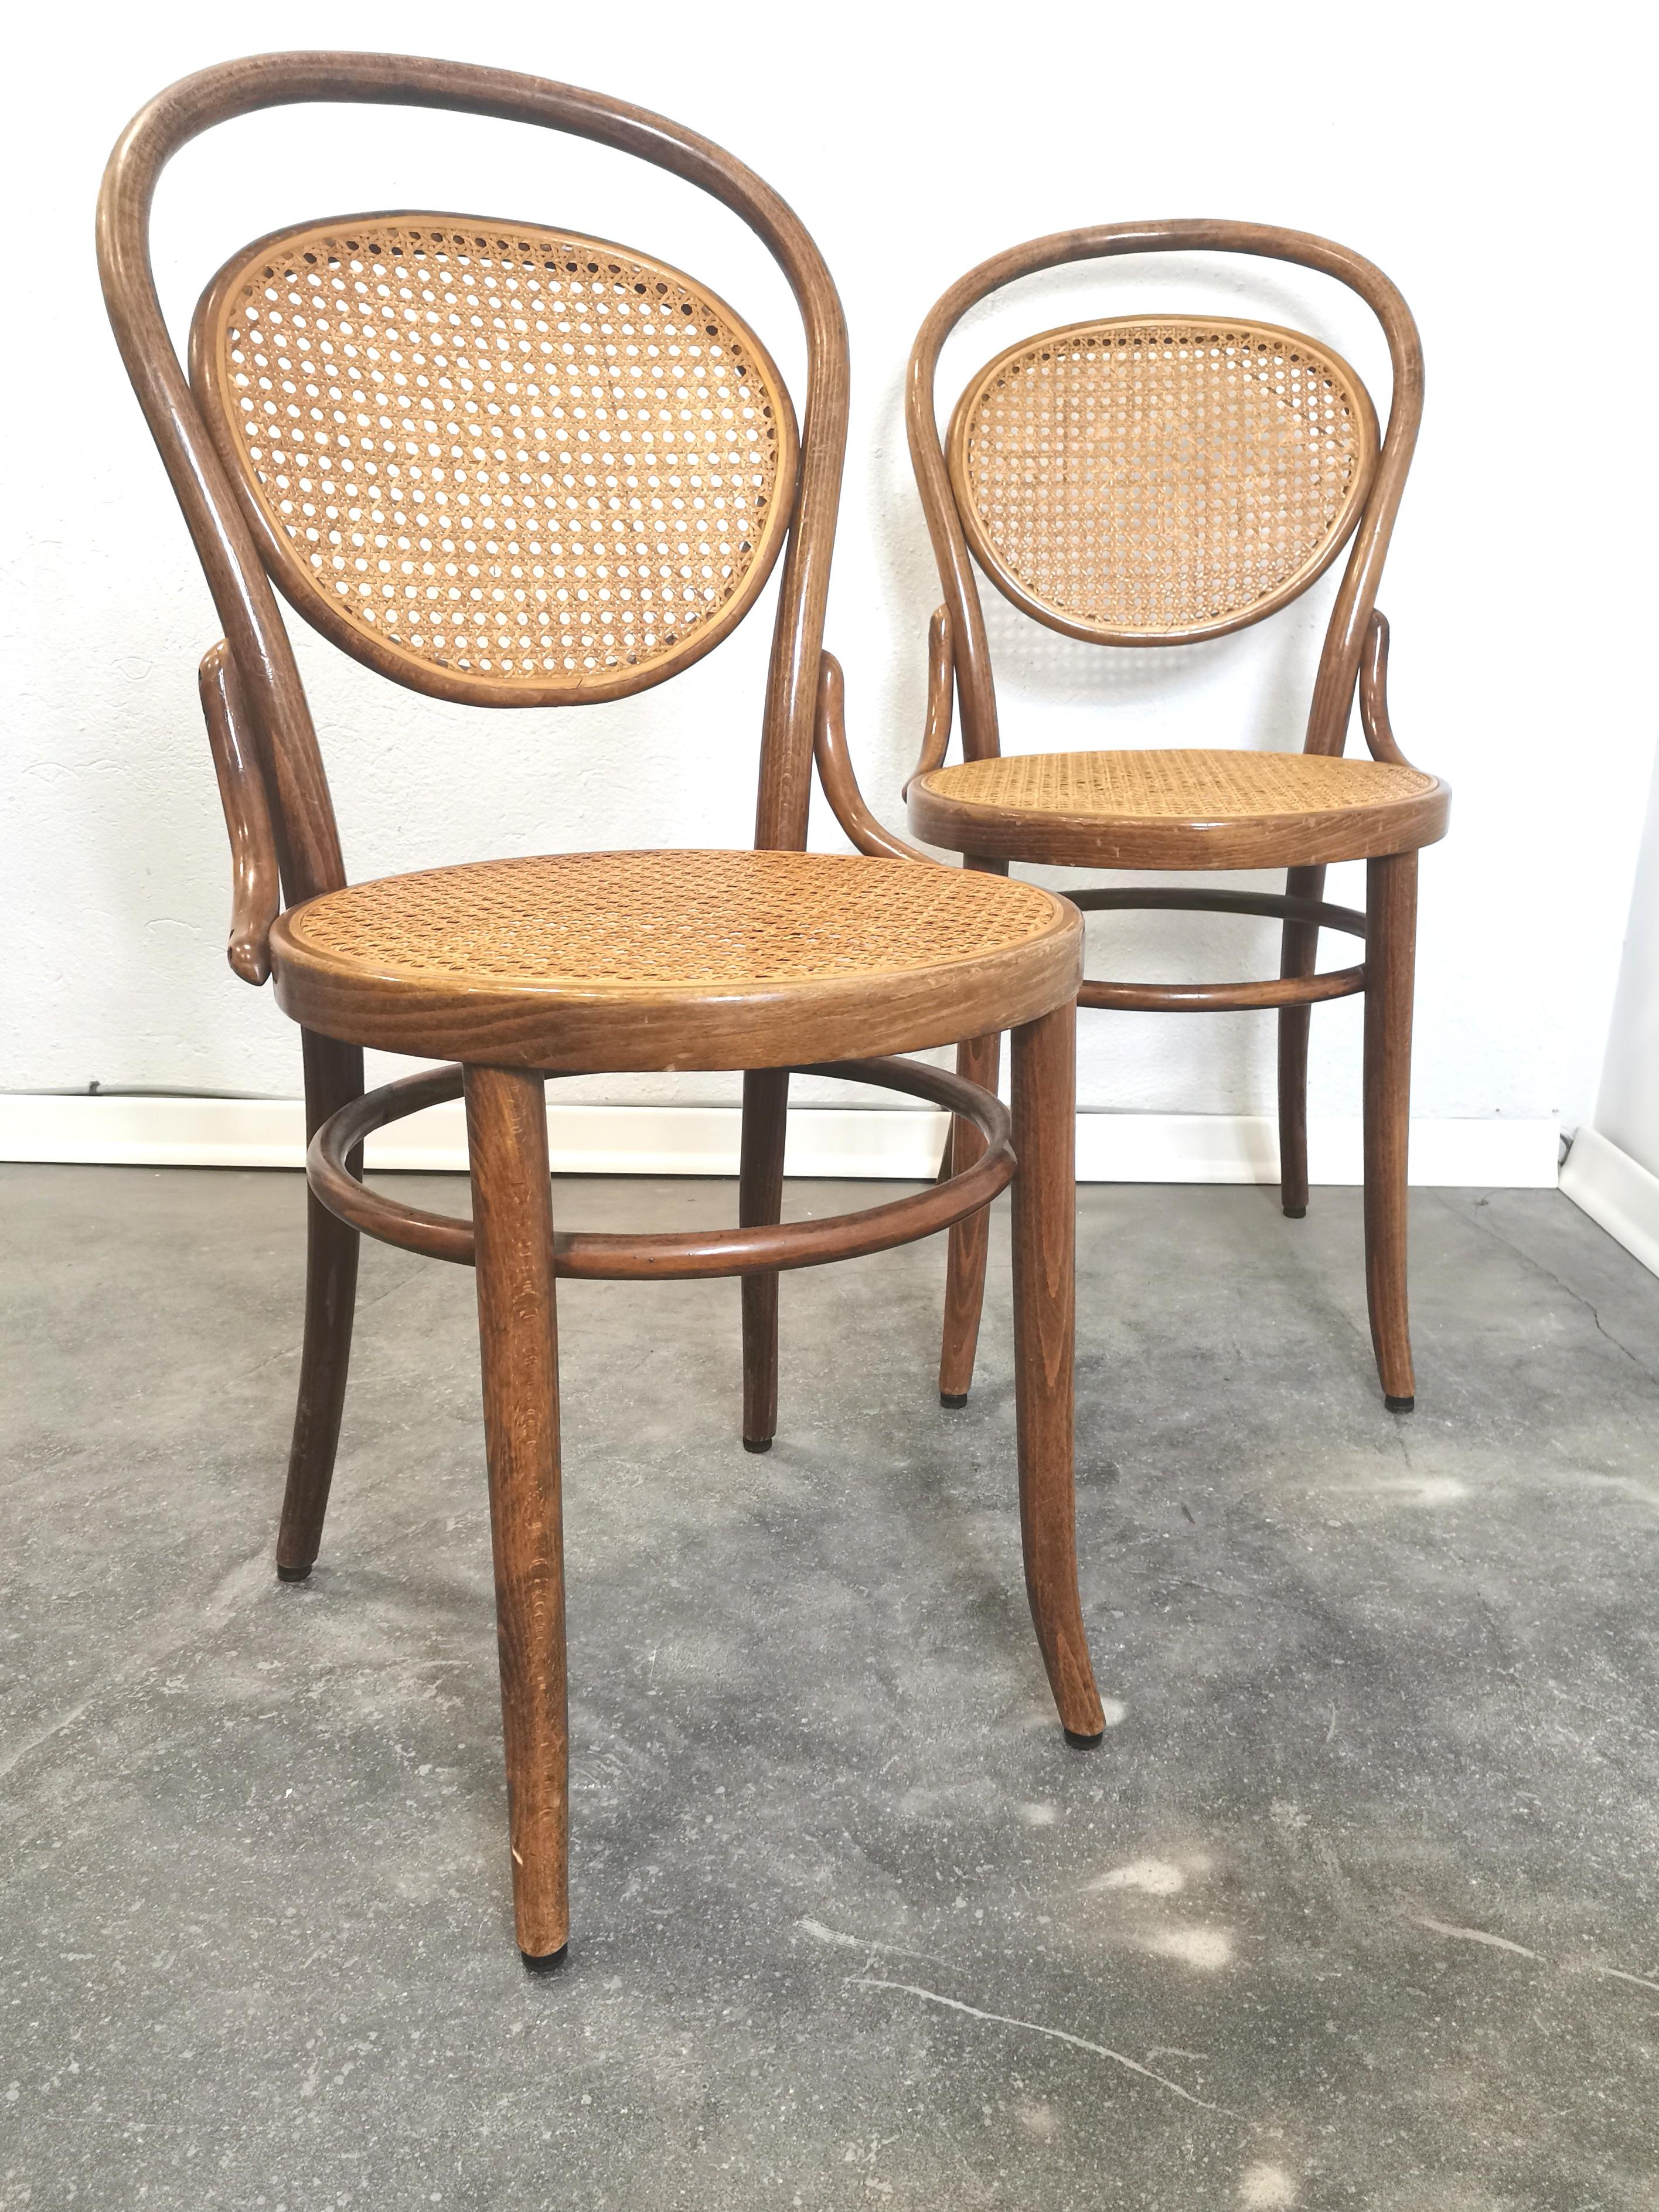 1 of 4 Thonet No. 215 chairs was manufactured 1960.
The chair was designed by Michael Thonet in 1859. 
It features a beech bentwood frame with cane. 
Clear wood finish. Wood and cane are in good condition. 

Price is for one chair.

Cane seat on two